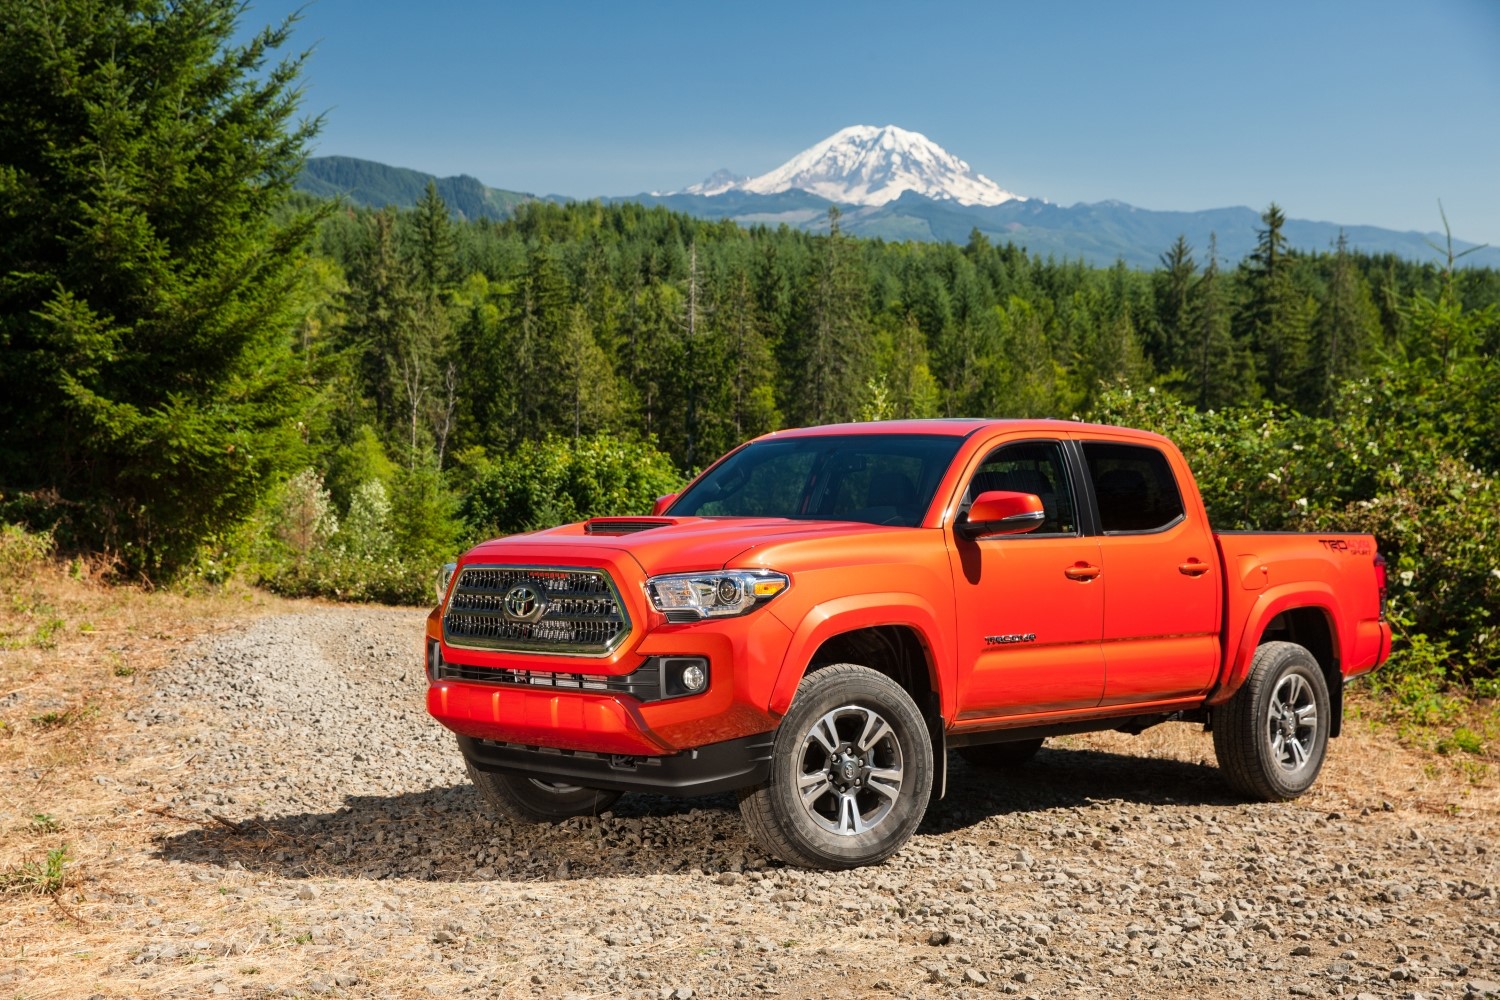 2018 Toyota Tacoma Crew Cab Specs Review And Pricing Carsession